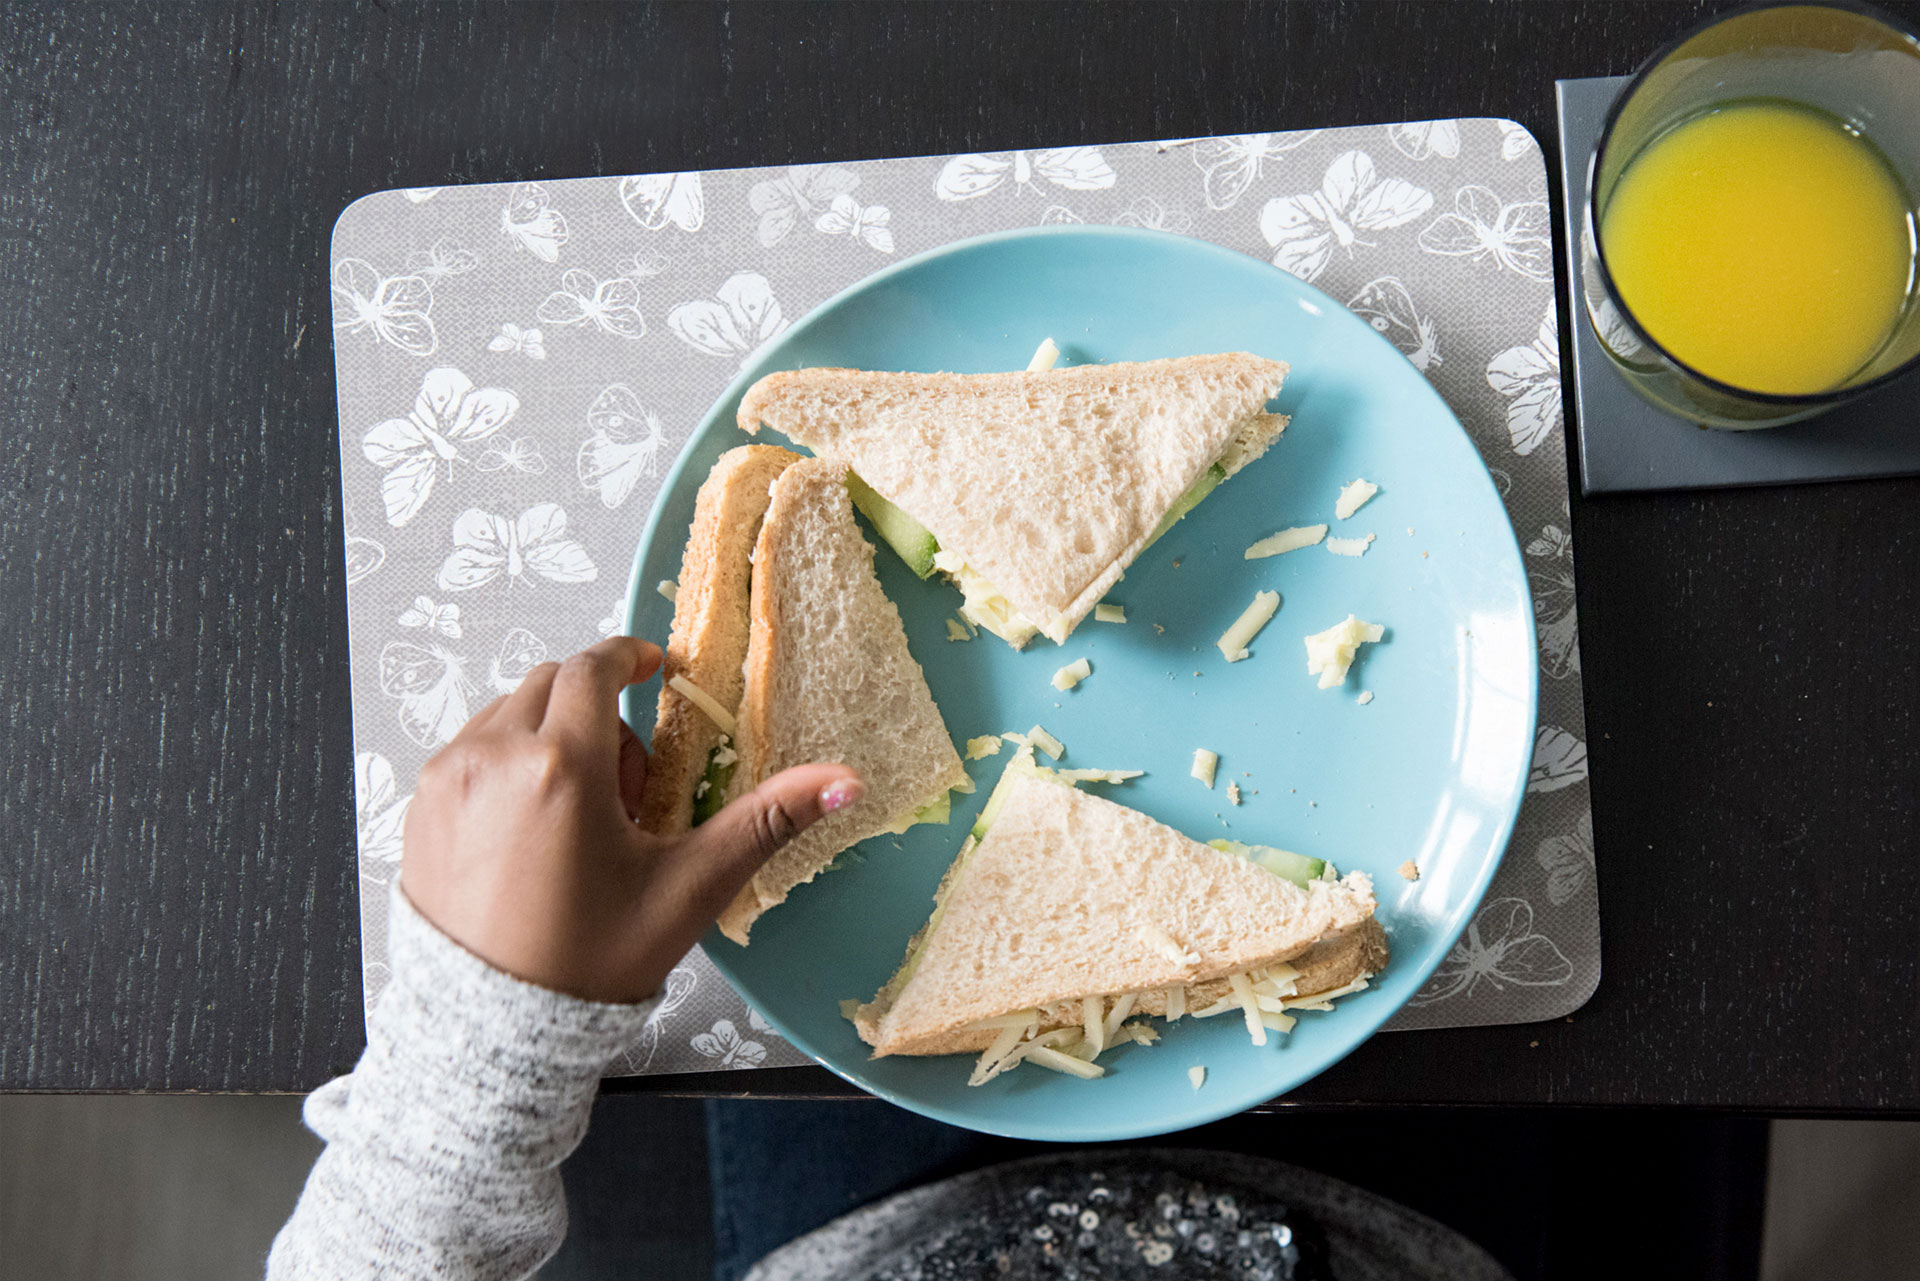 Aerial view of child eating a cheese and cucumber sandwich